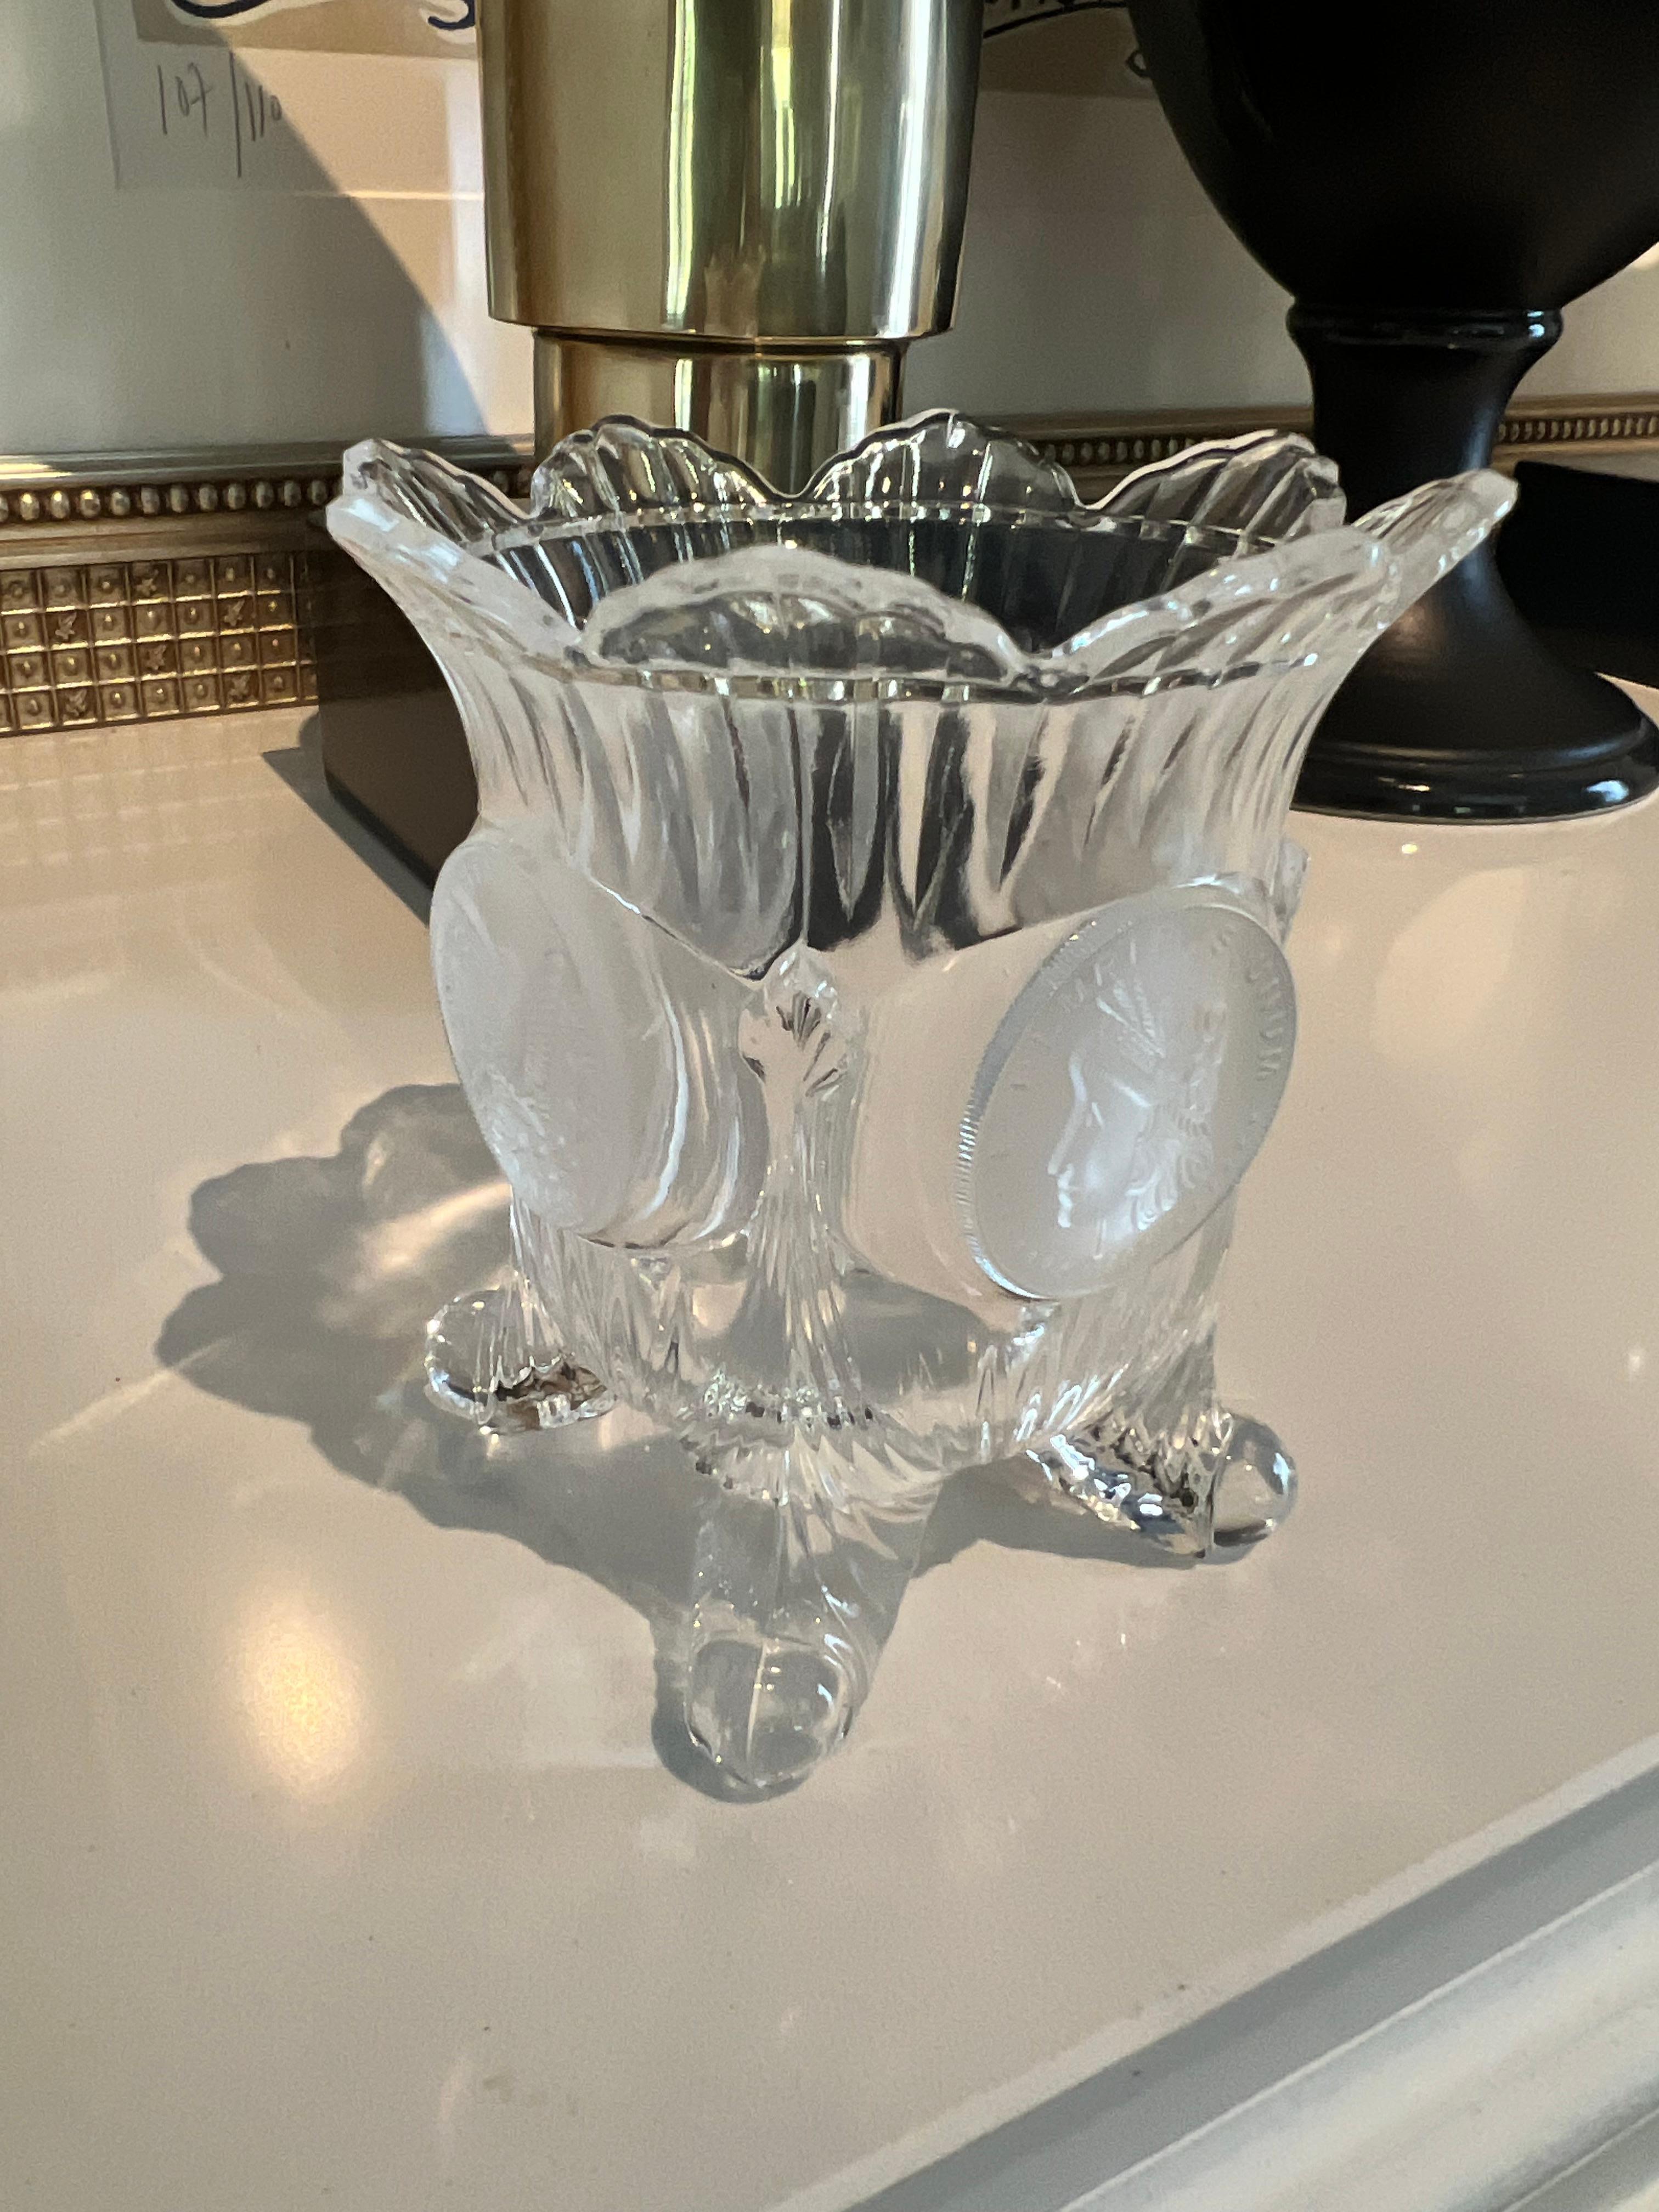 A unique vase - from shape to having legs and the special Medallions surrounding the piece.

The Medallions are the front and back of Coins - an interesting scallop top with four curled legs... the piece works for well as a place holder for a